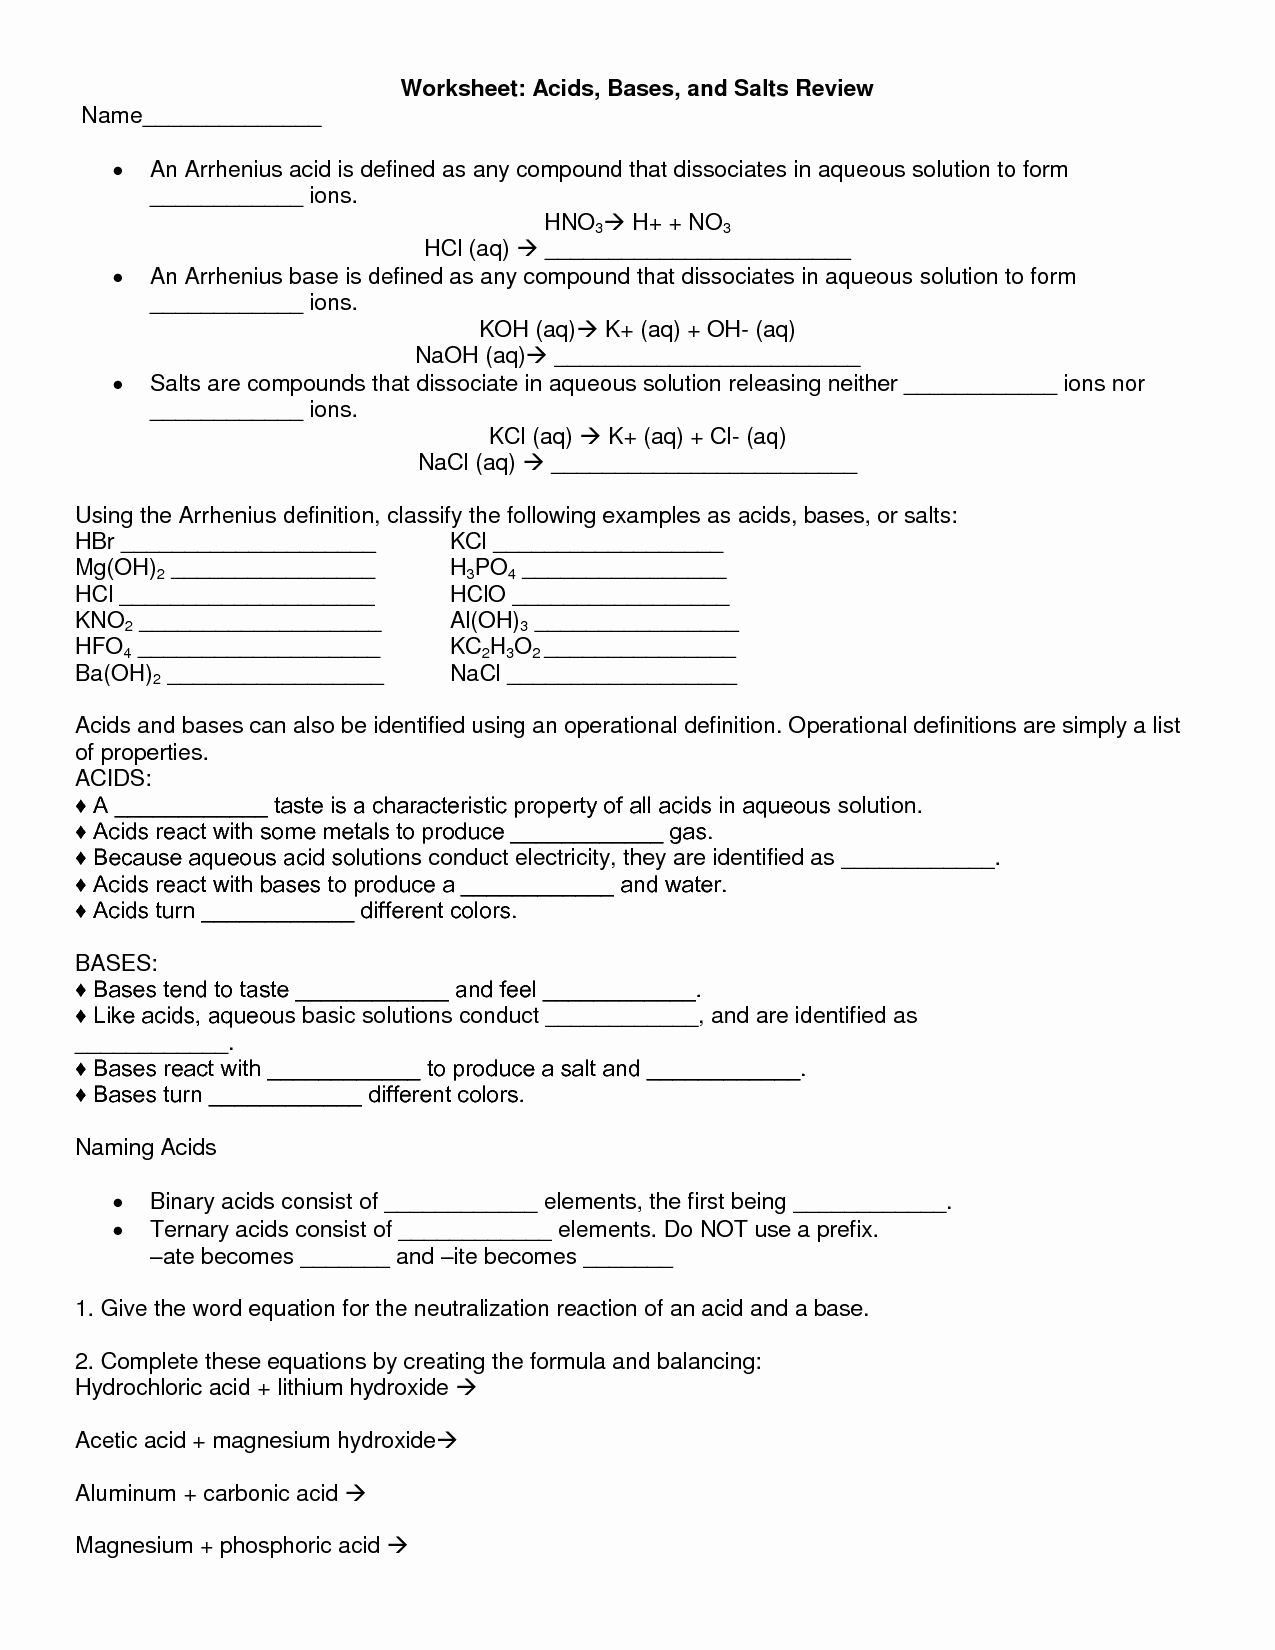 Acids and Bases Worksheet Answers Beautiful 15 Best Of Practice Naming Acids Worksheet Naming